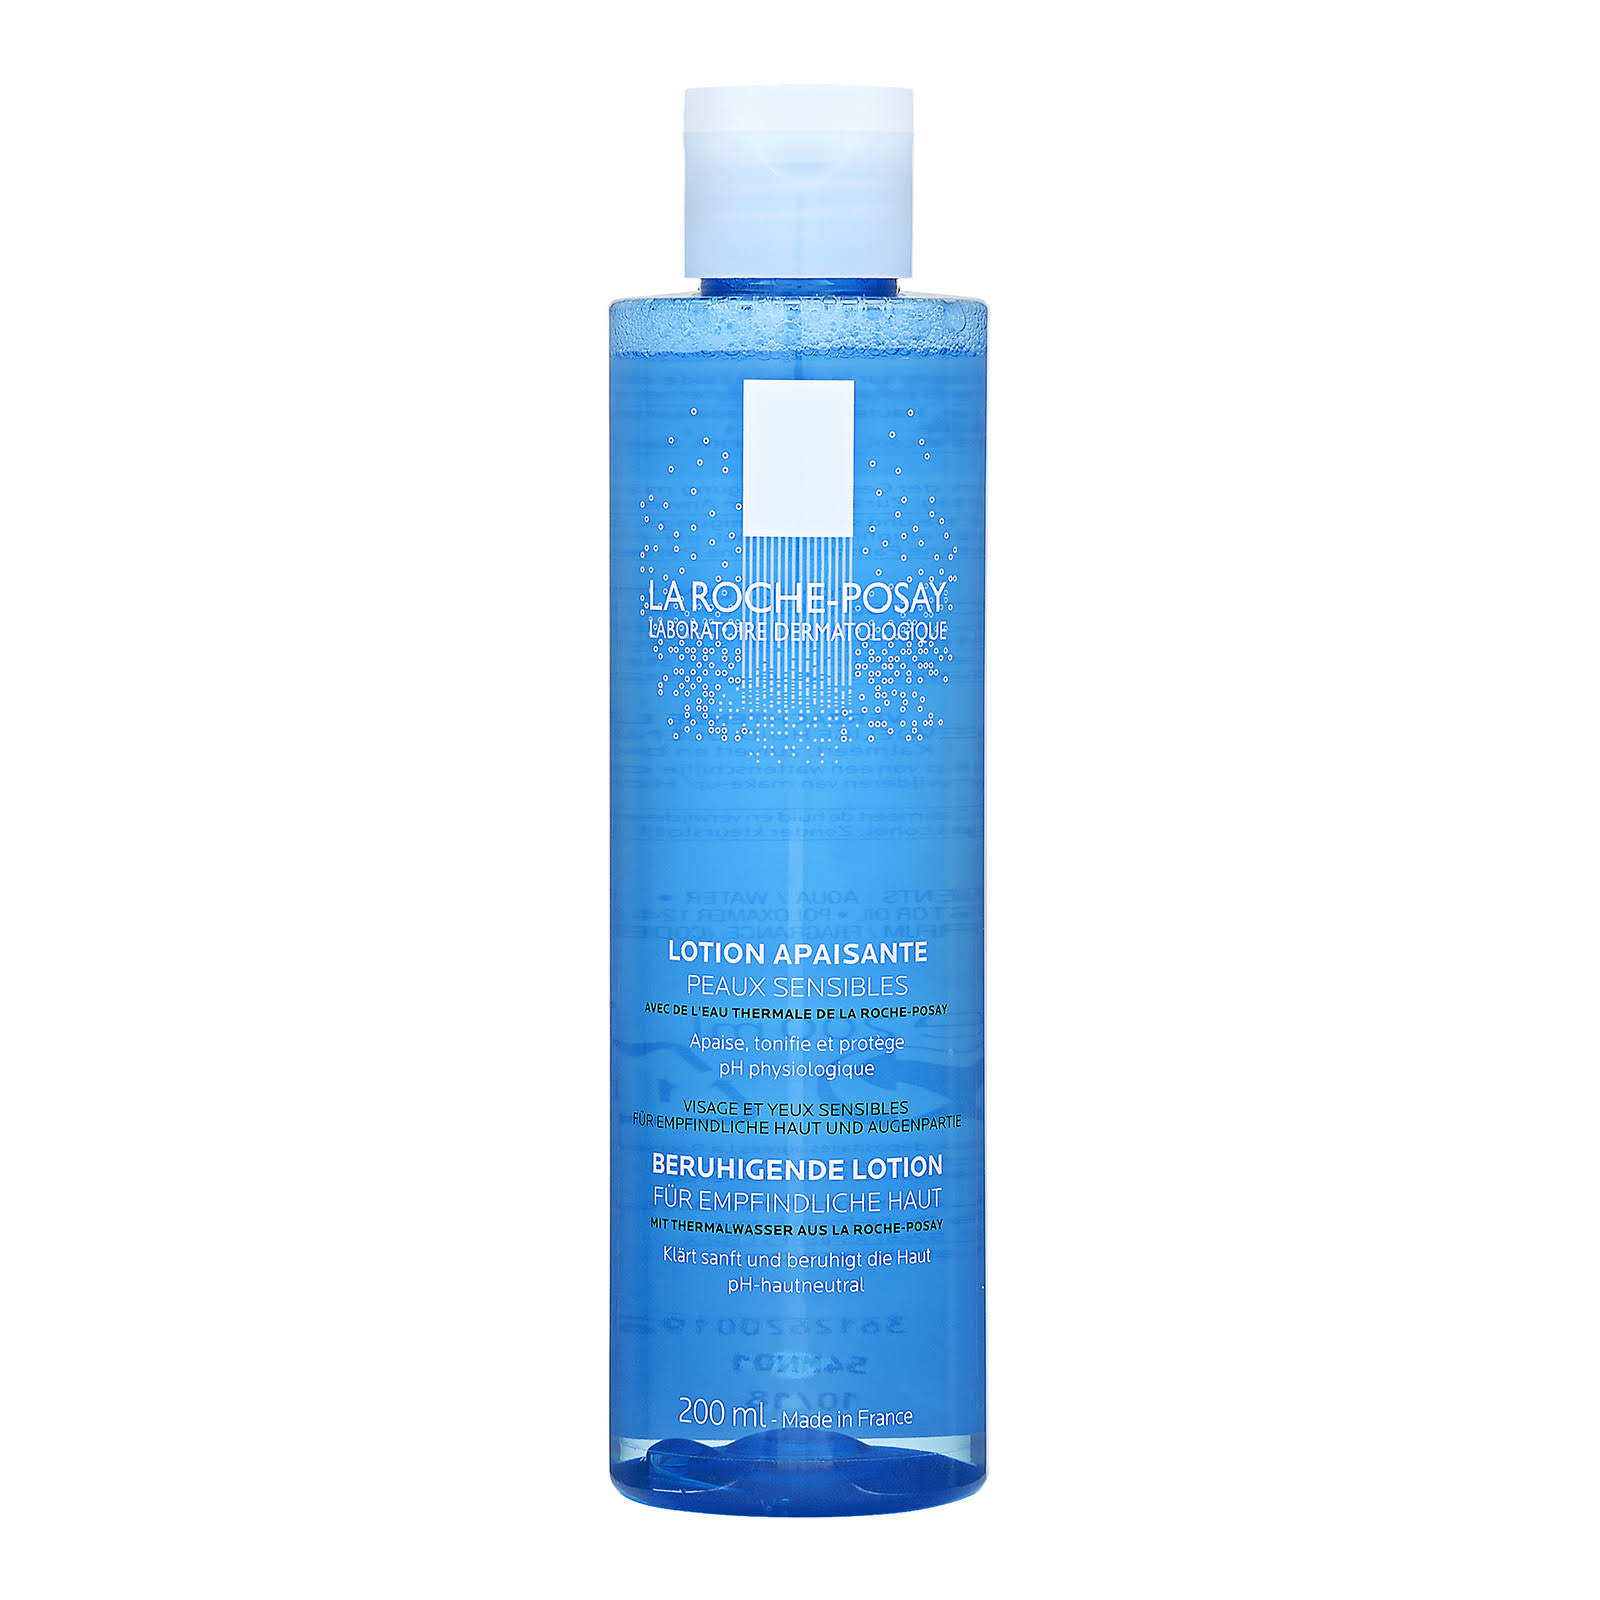 La Roche-Posay Soothing Lotion for Sensitive Skin - 200ml